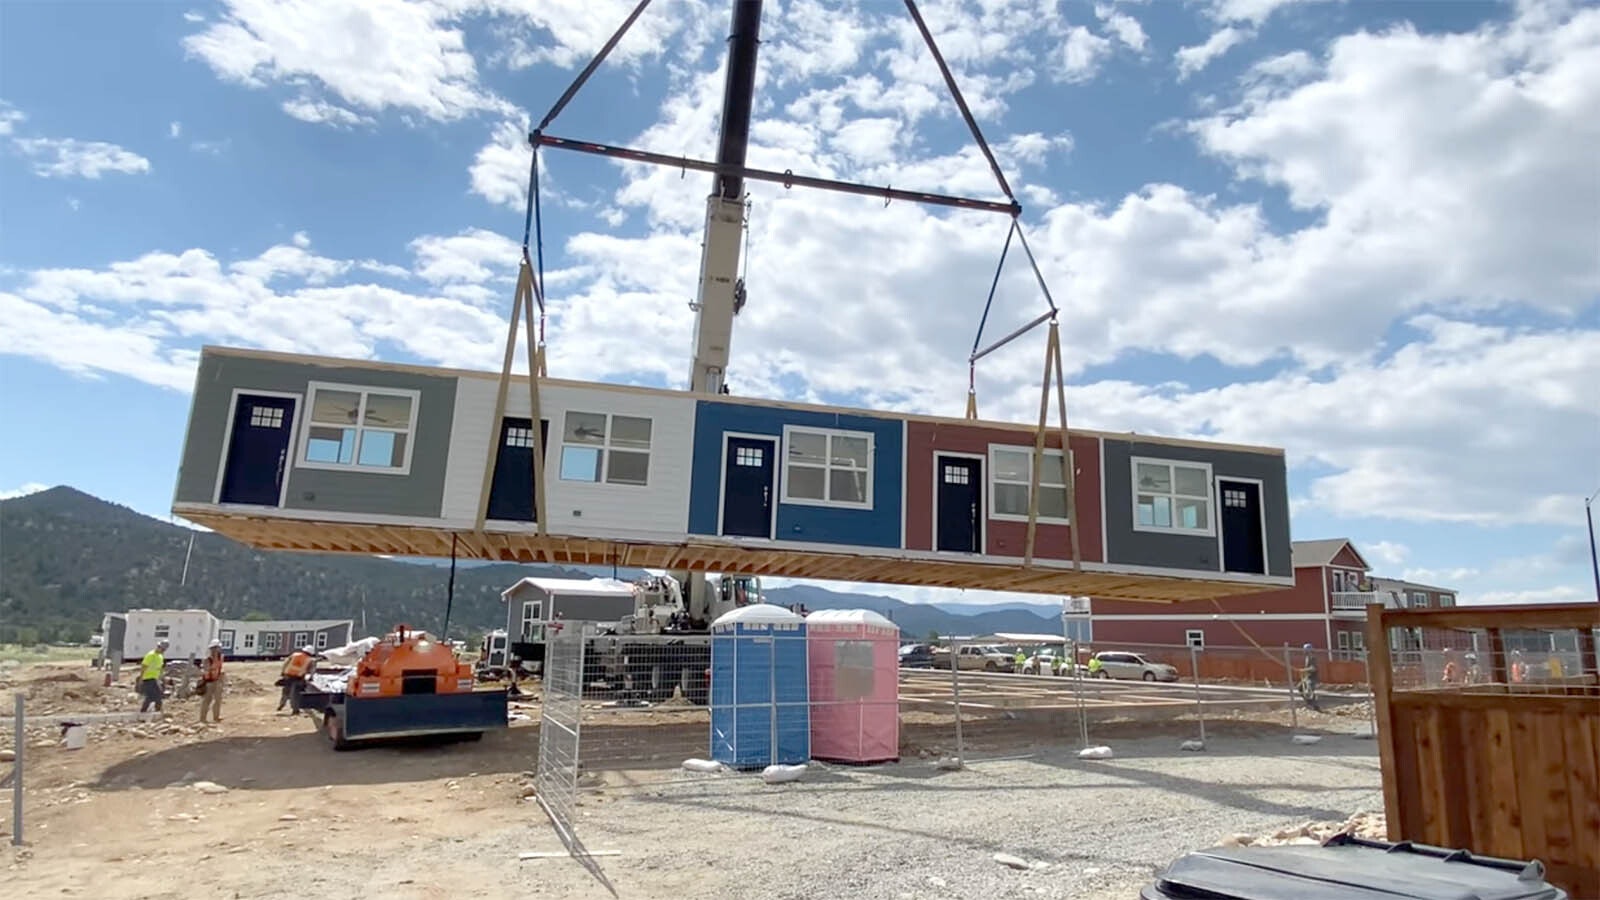 A still shot from a Fading West video showing a modular housing unit being placed on a pad.